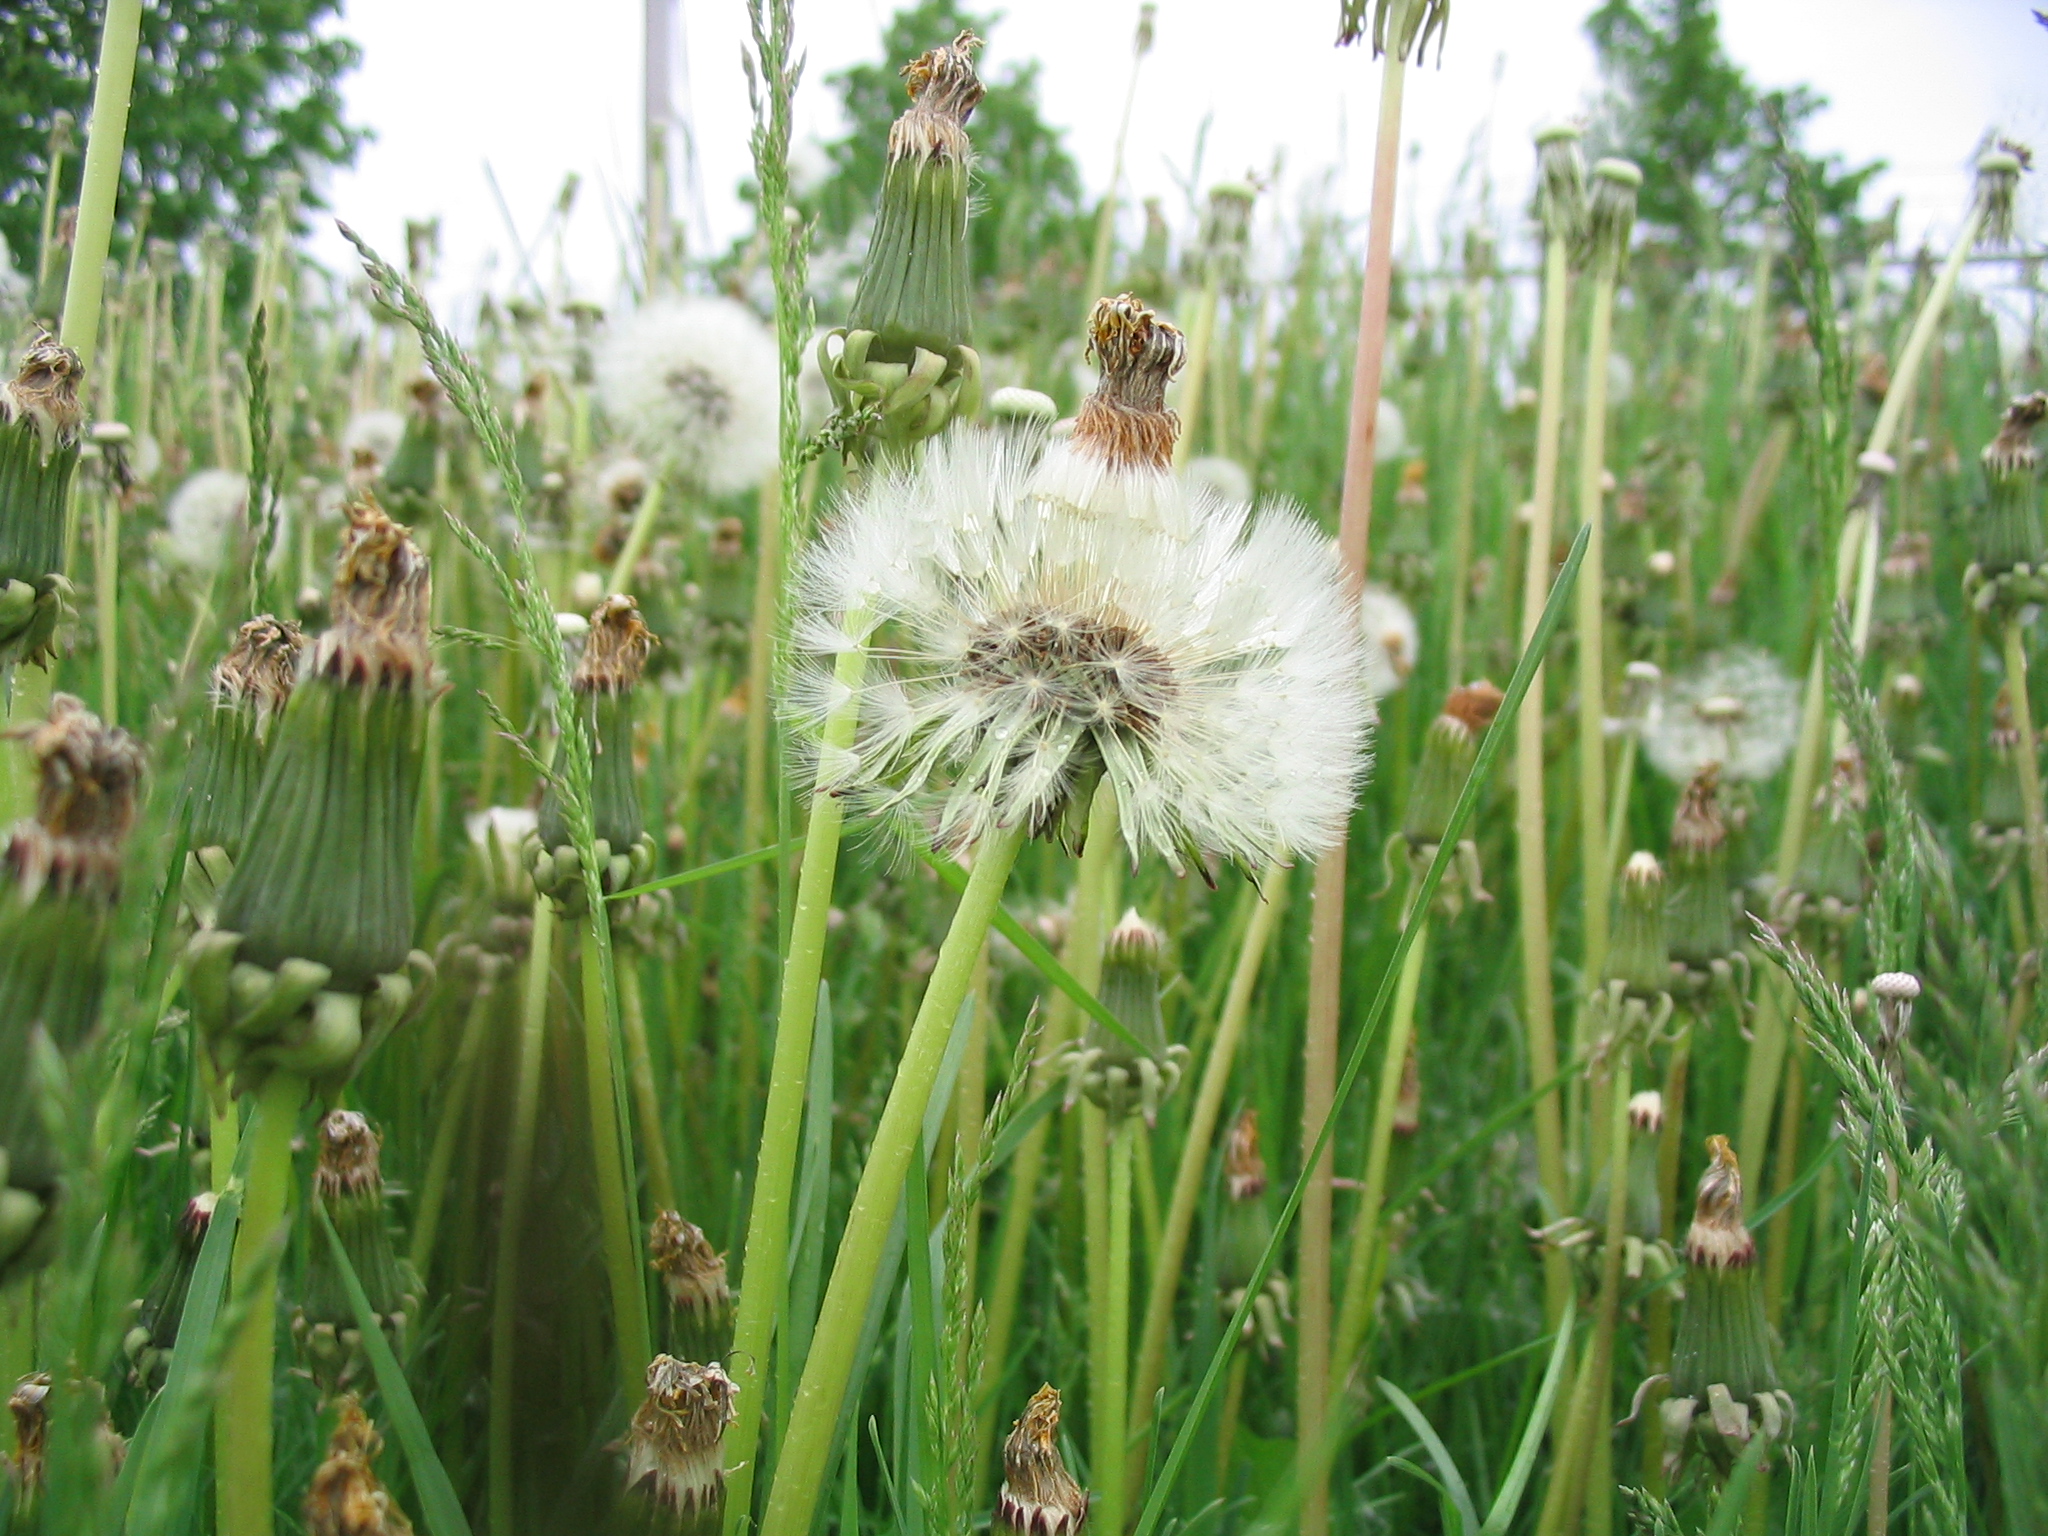 Weeds in a grassy field